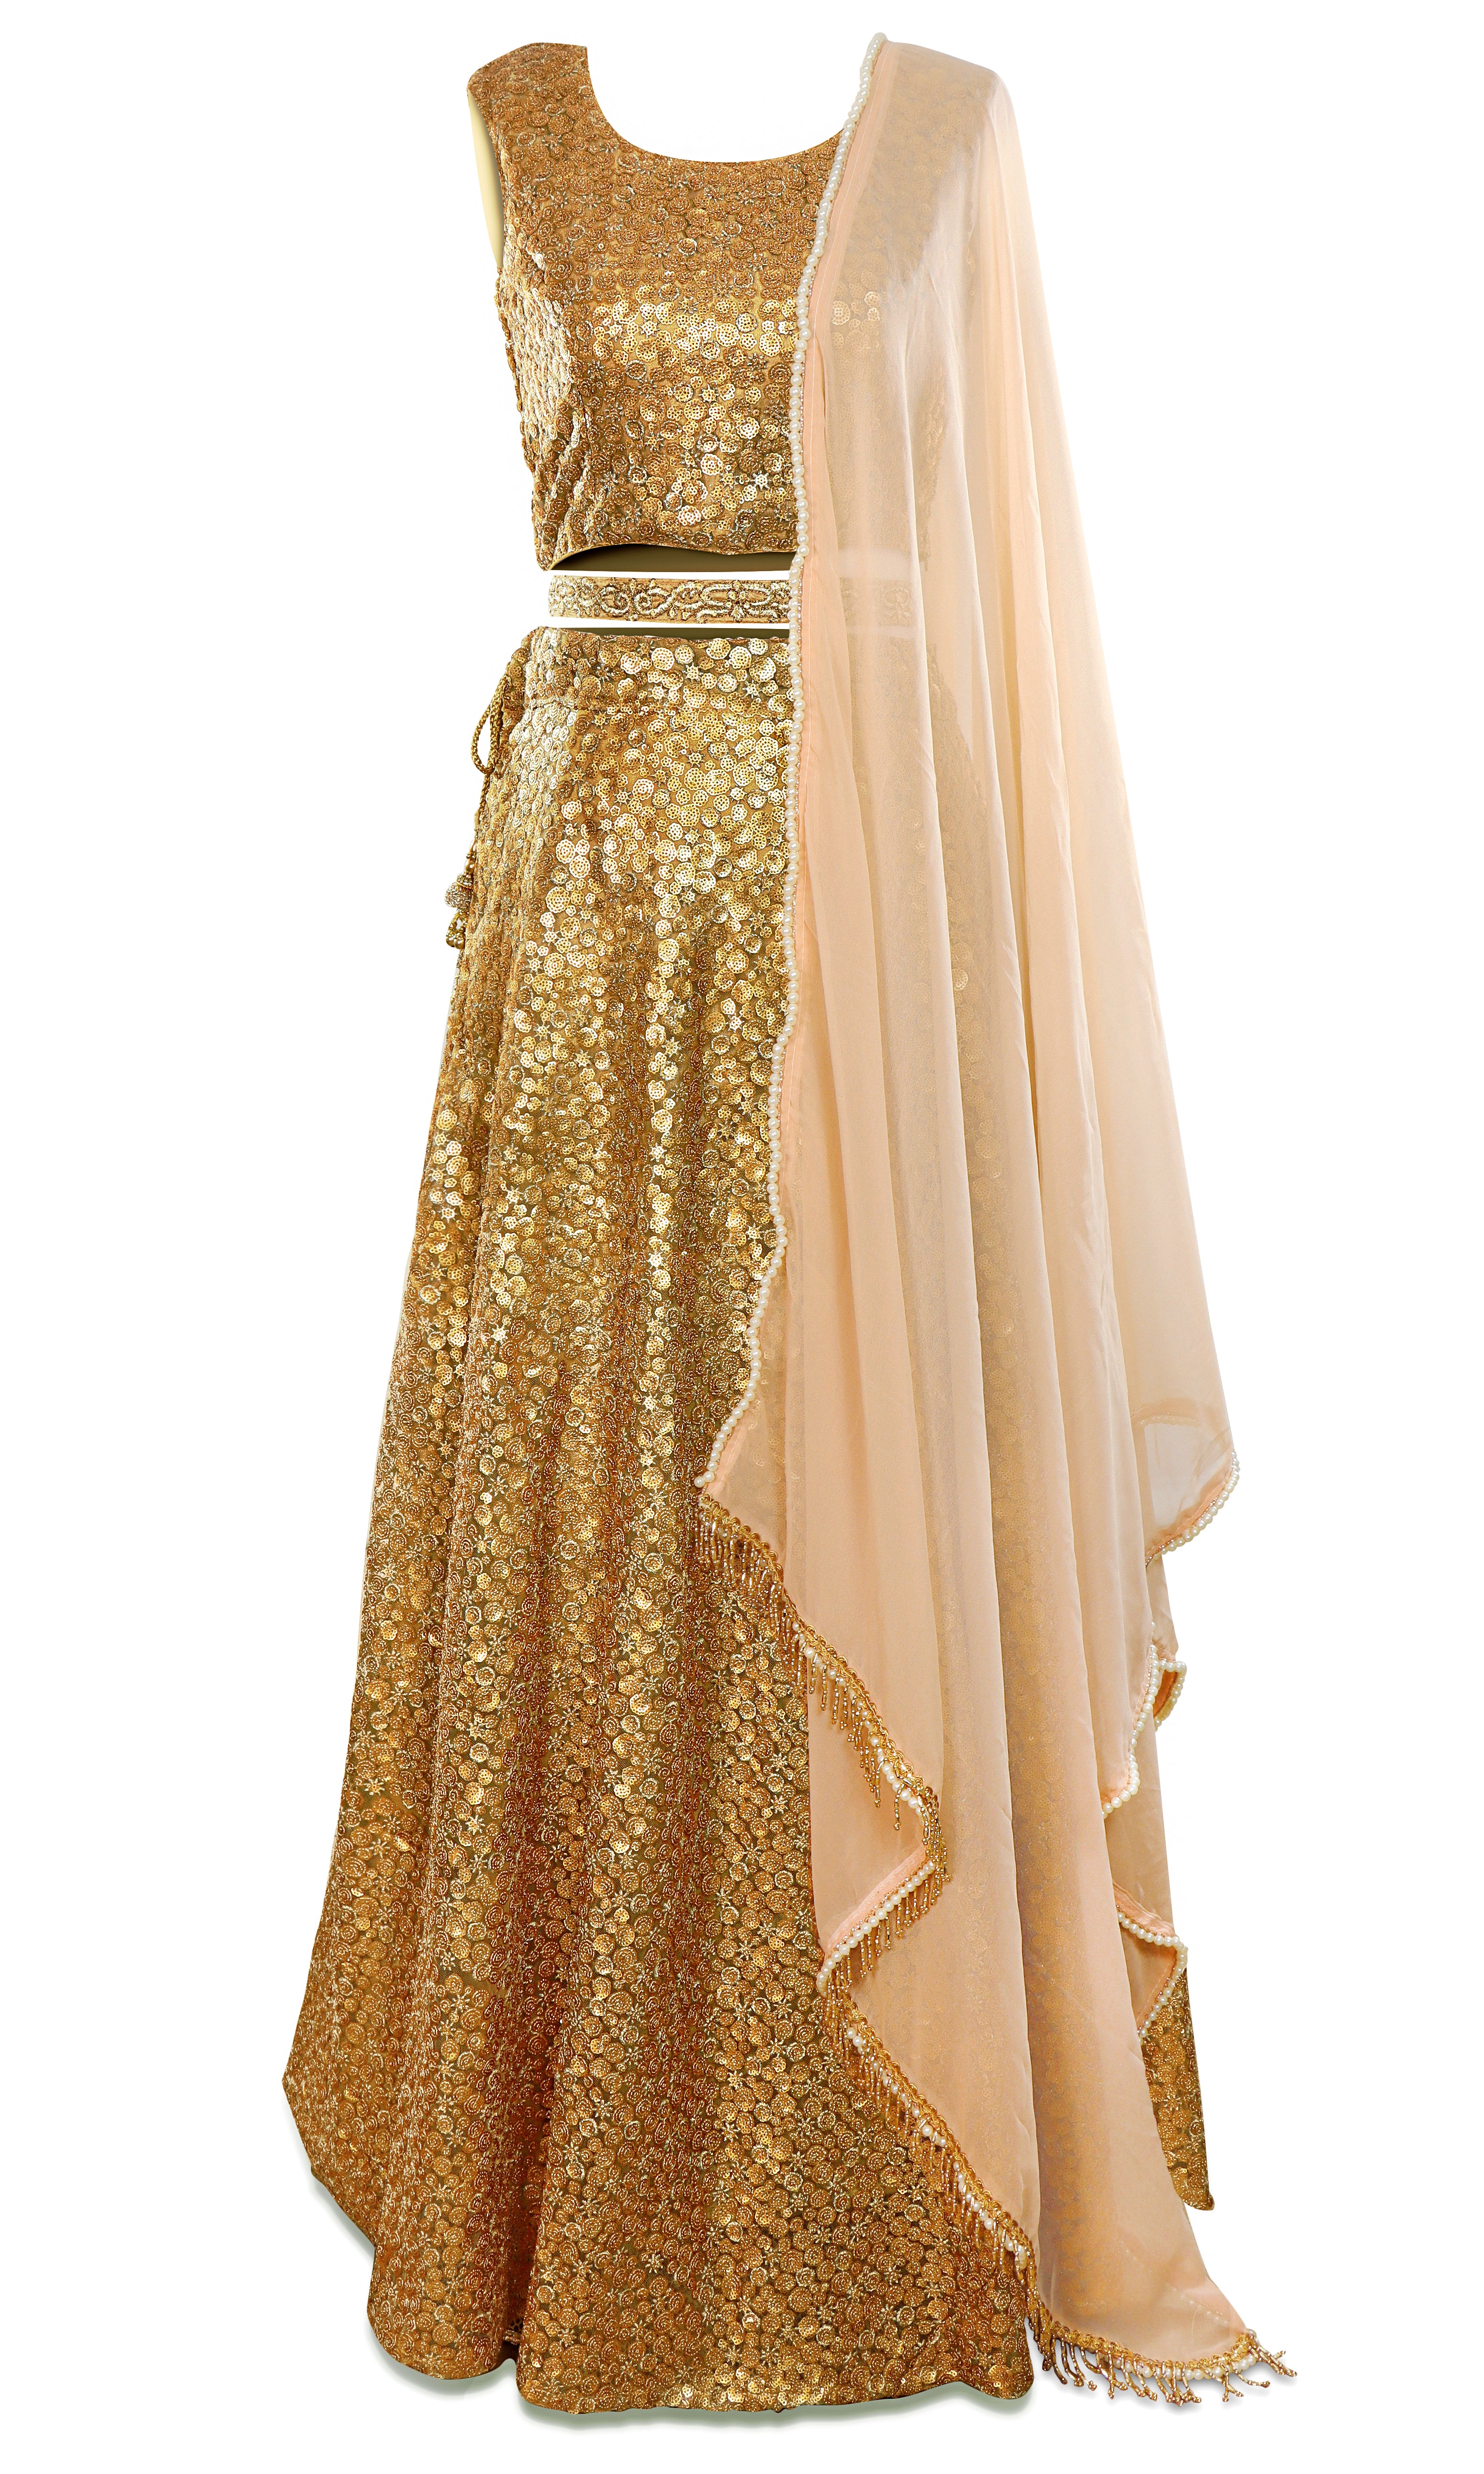 Gold lehenga lehenga is all hands on deck! Stunning pale pink dupatta with pearls and gold stones around the border.